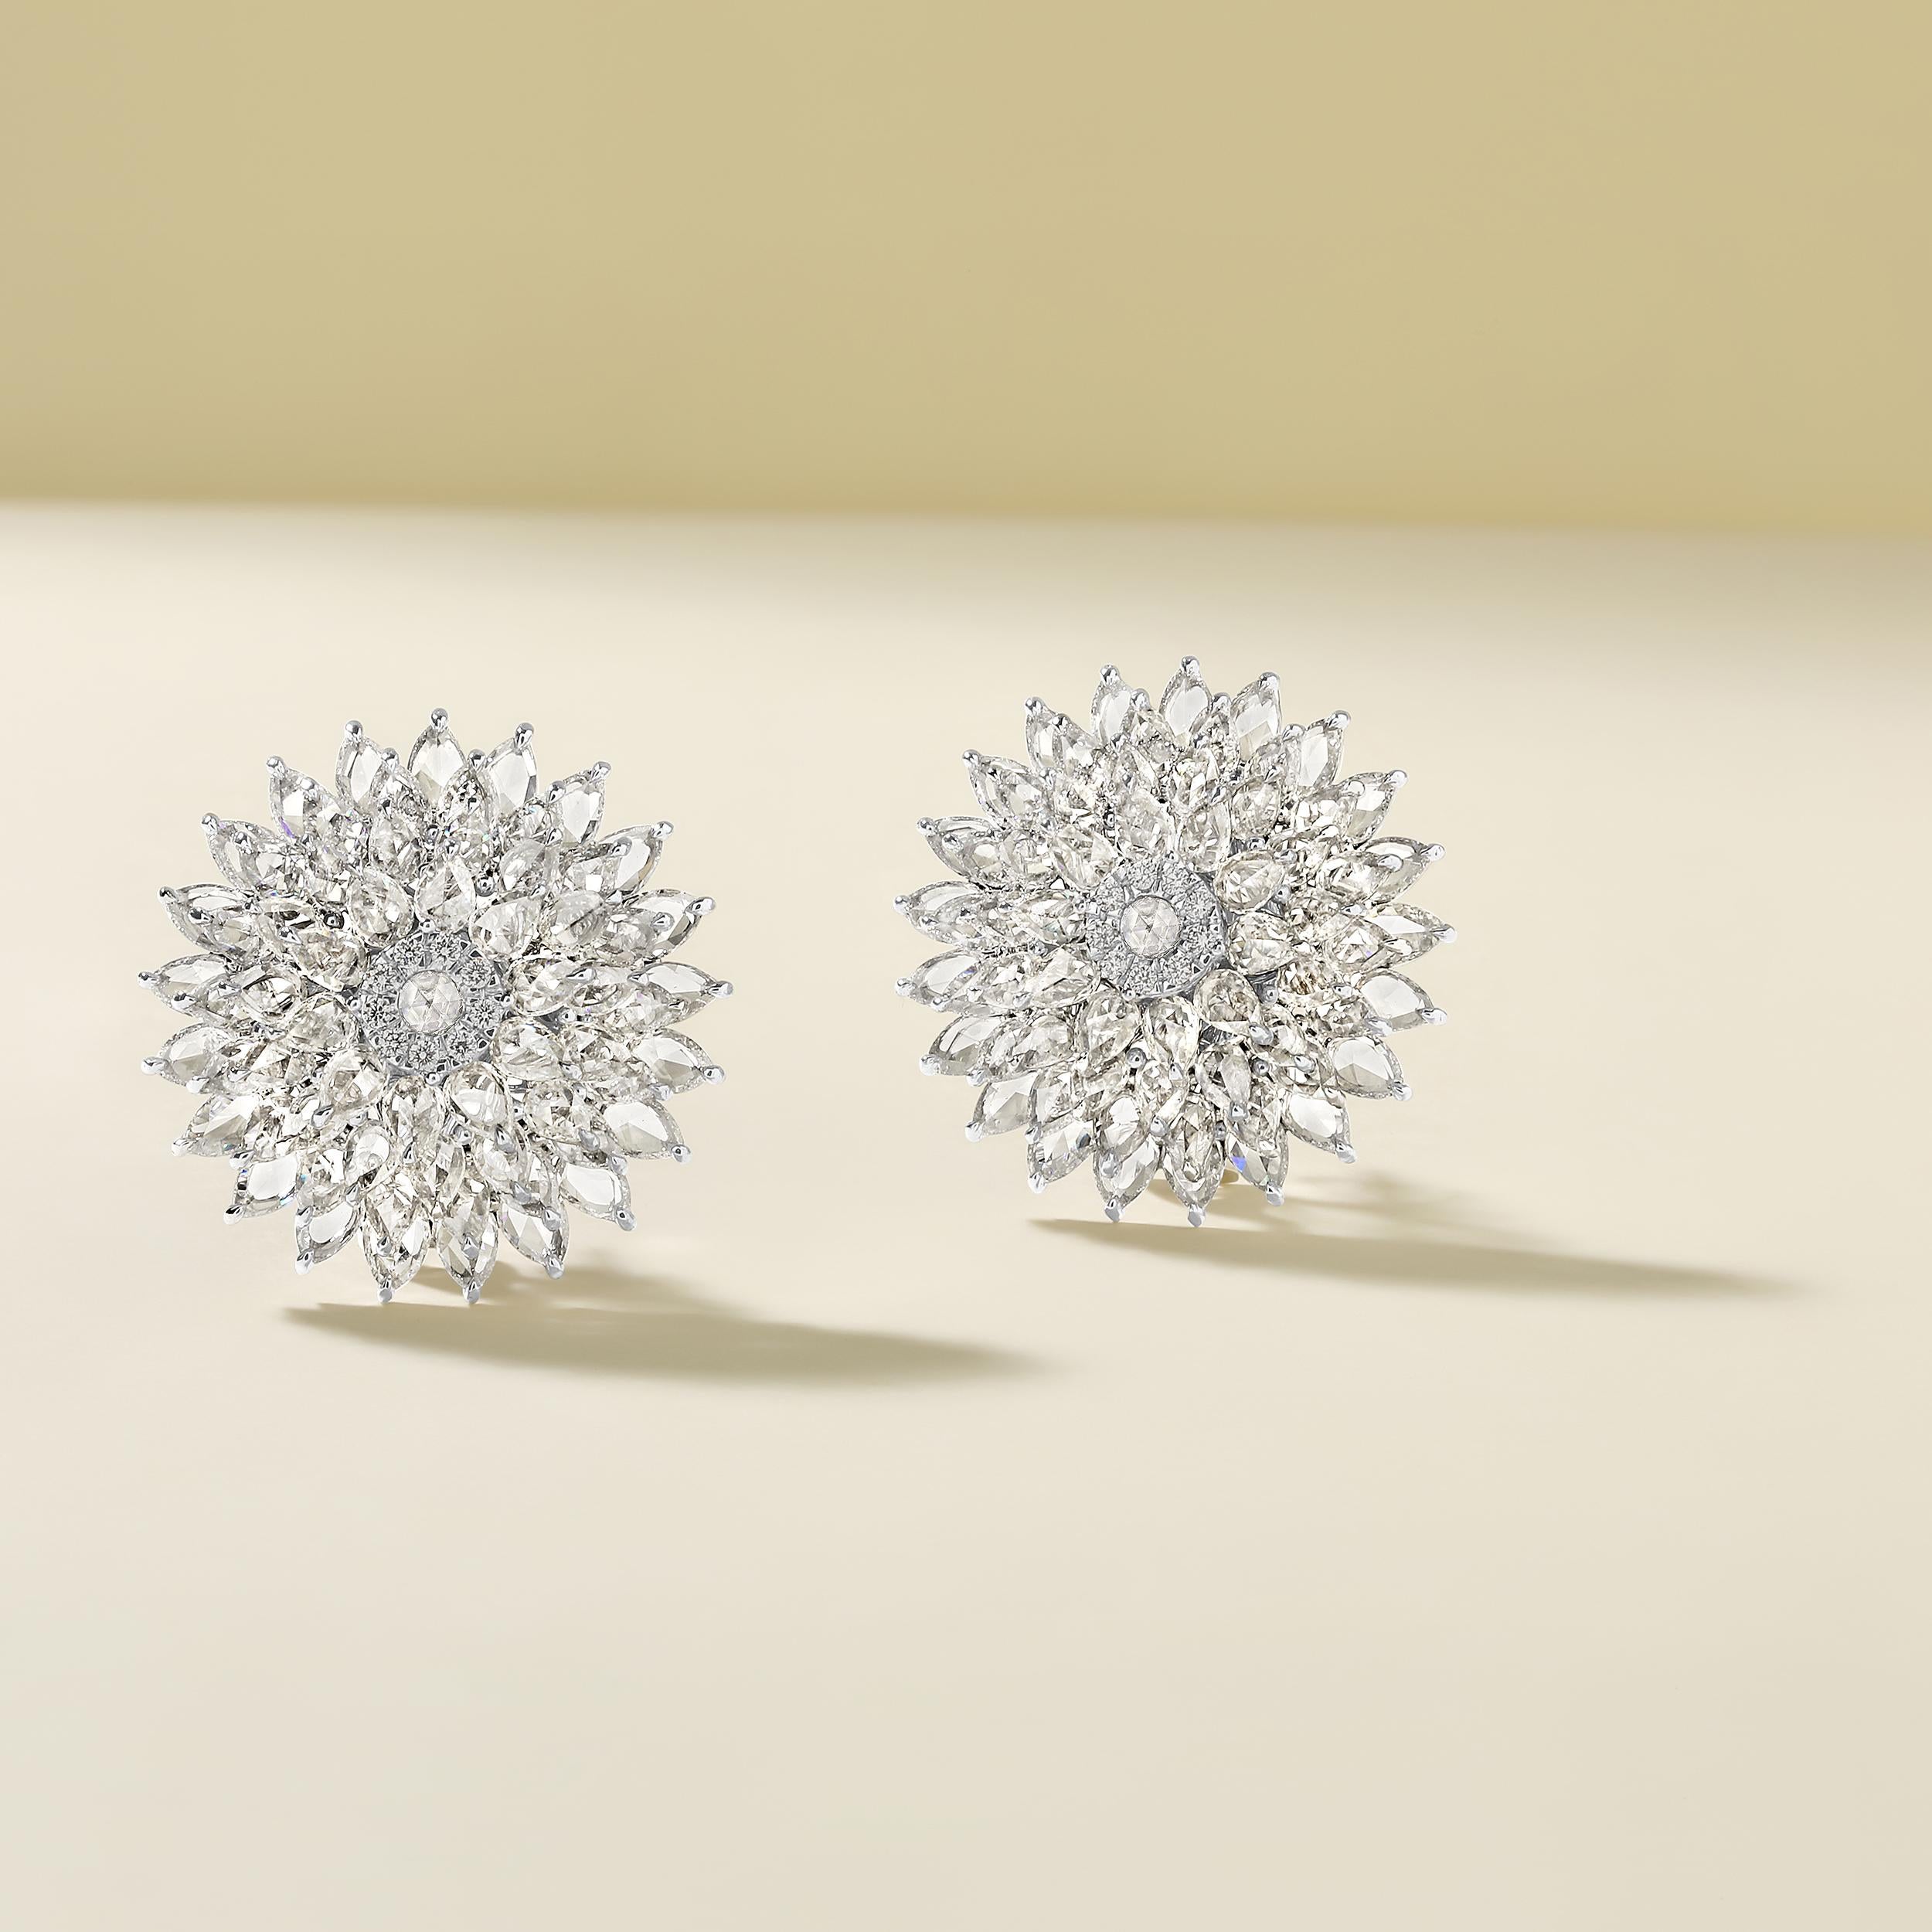 Crafted in 18.82 grams of 18K White Gold, the earrings contain 130 stones of Rose Cut Natural Diamonds with a total of 8.46 carat in E-F color and VVS-VS clarity combined with 22 stones of Round Natural Diamonds with a total of 0.18 carat in E-F